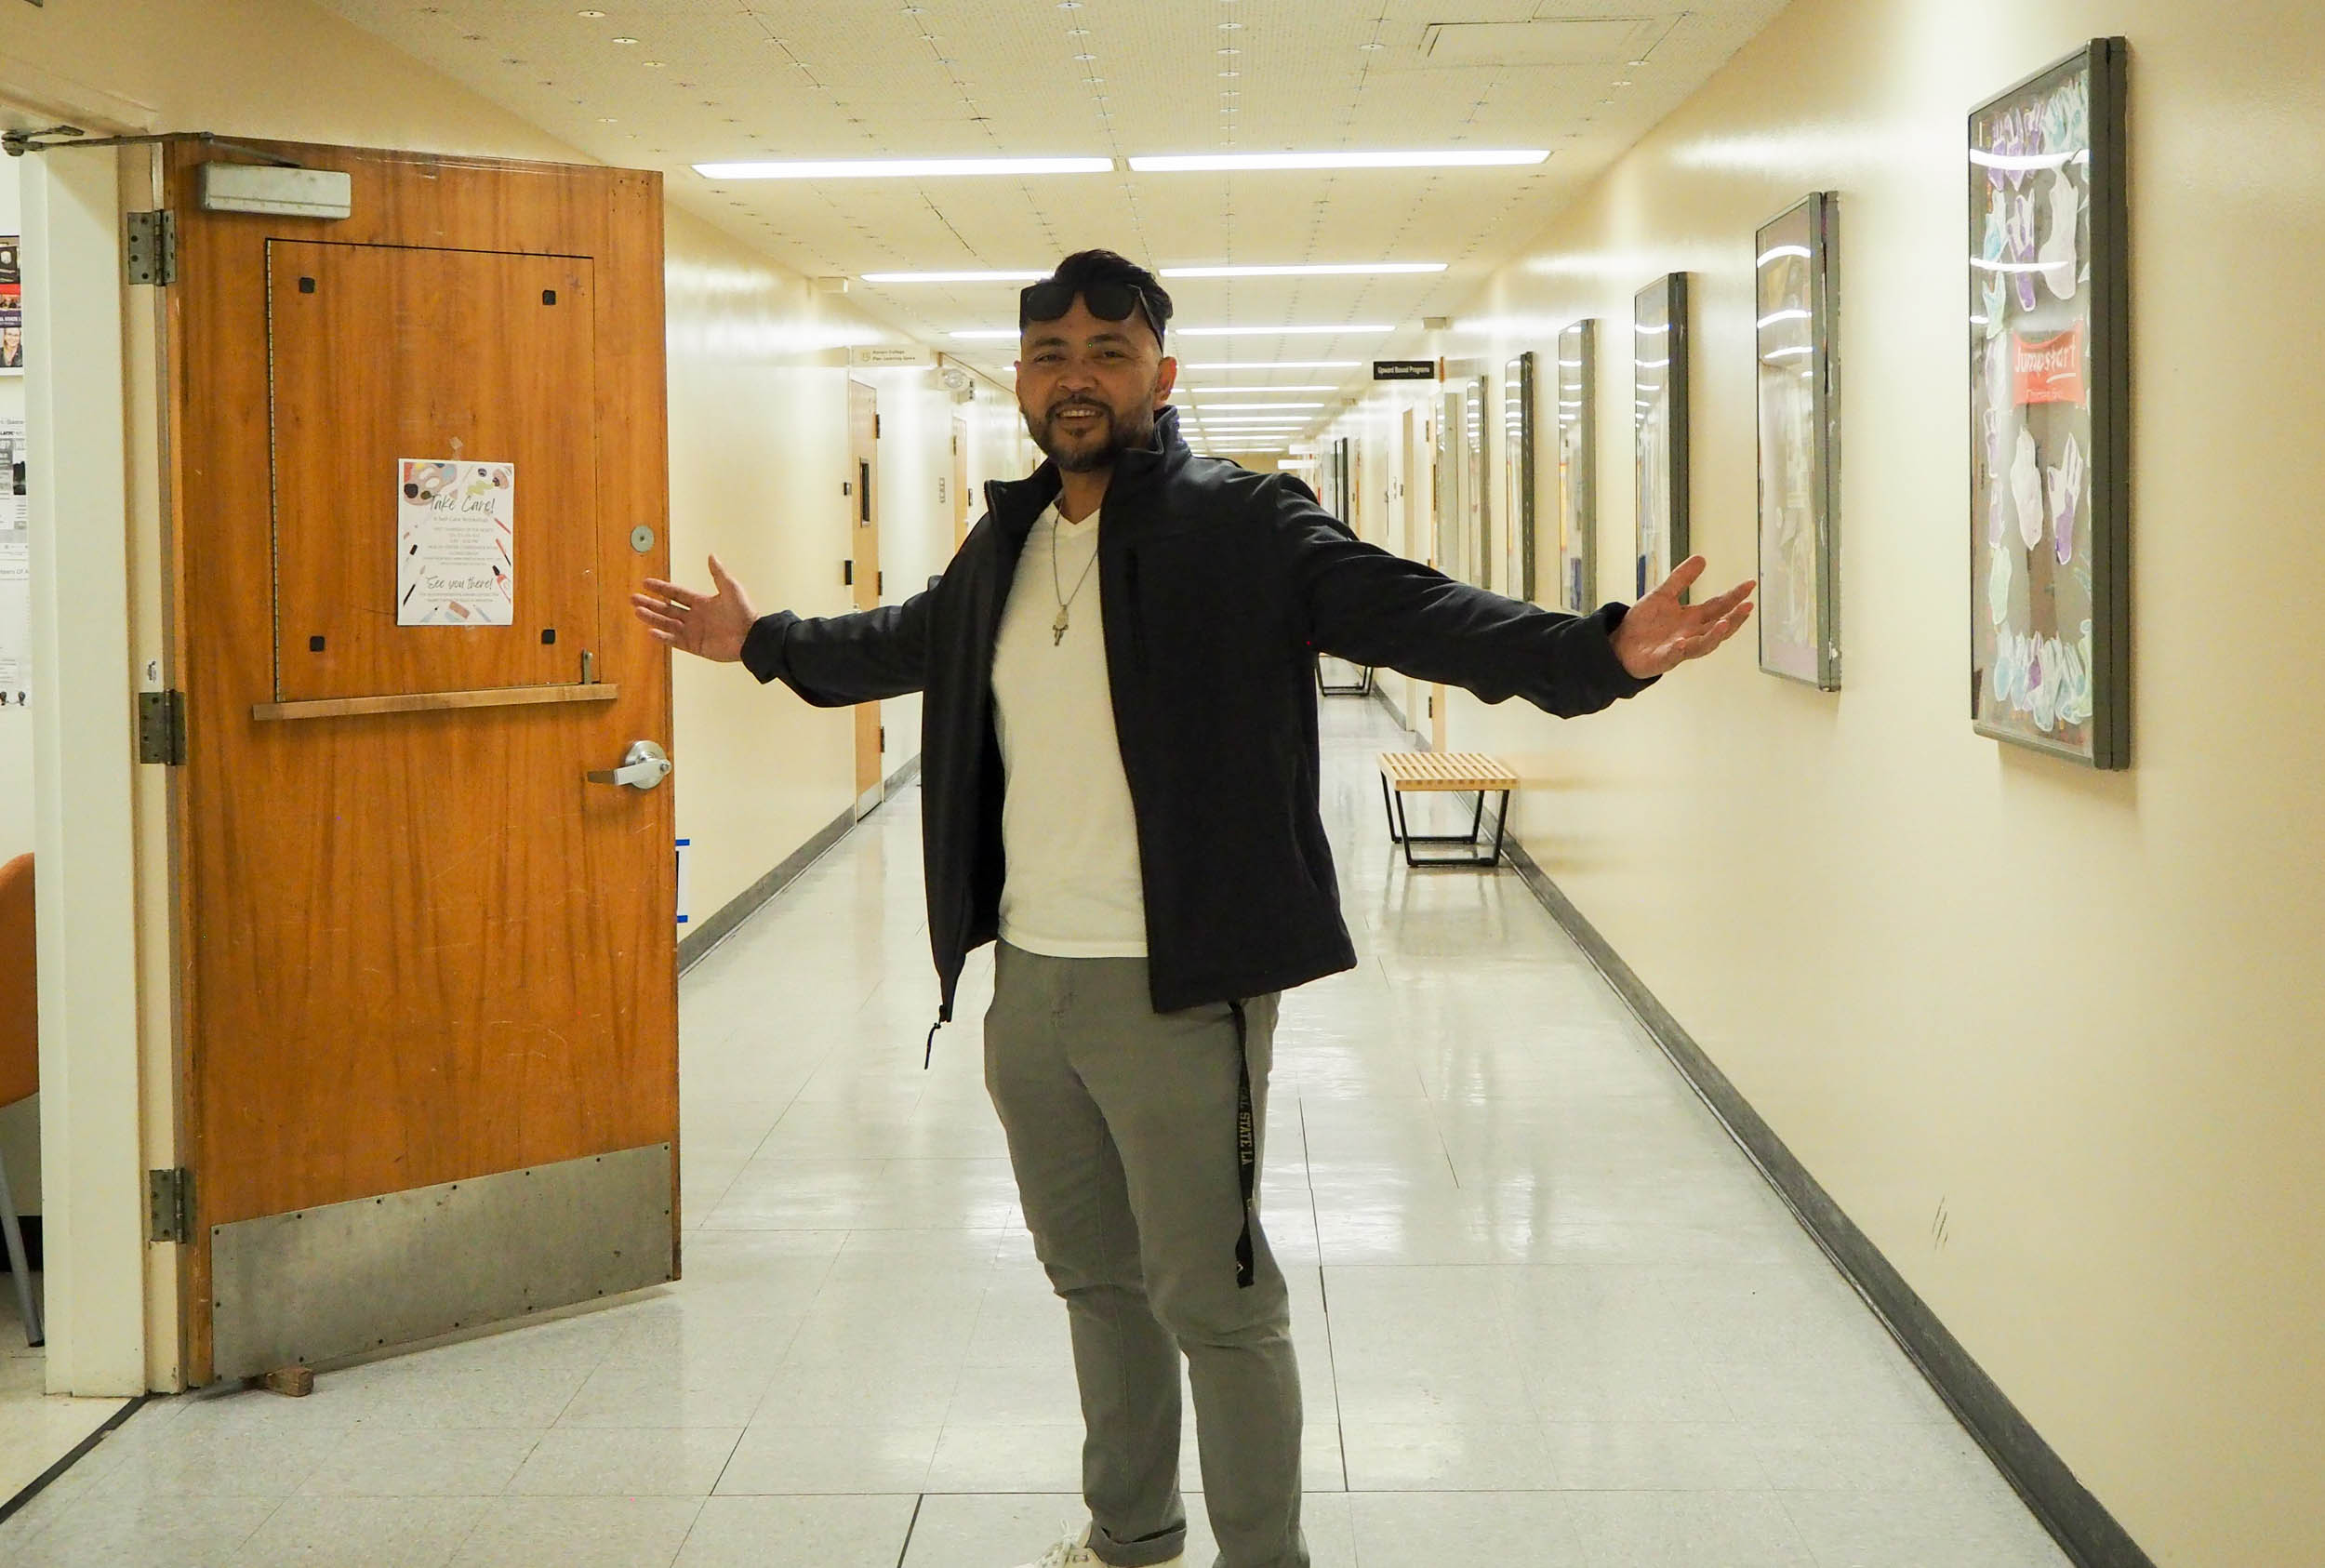 A man stands in the middle of a long university hallway with open arms.